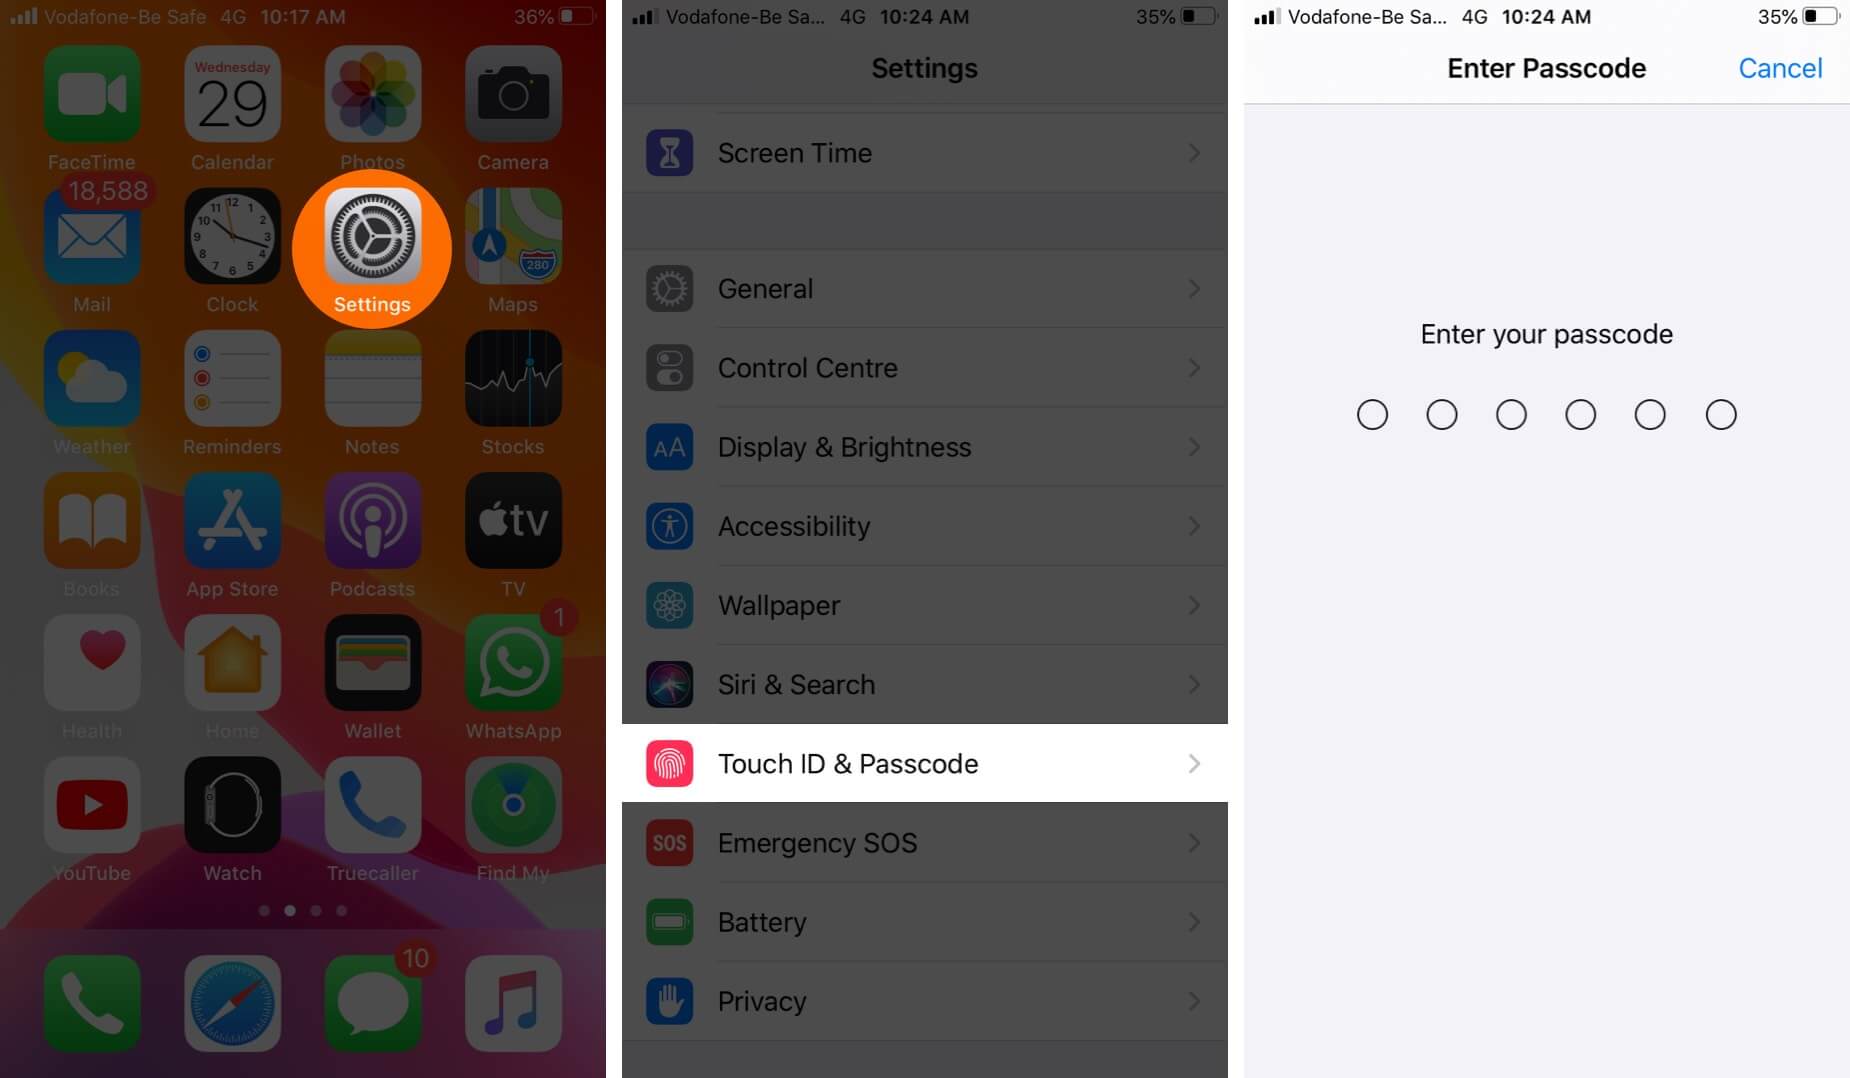 Open Settings and Tap on Touch ID & Passcode